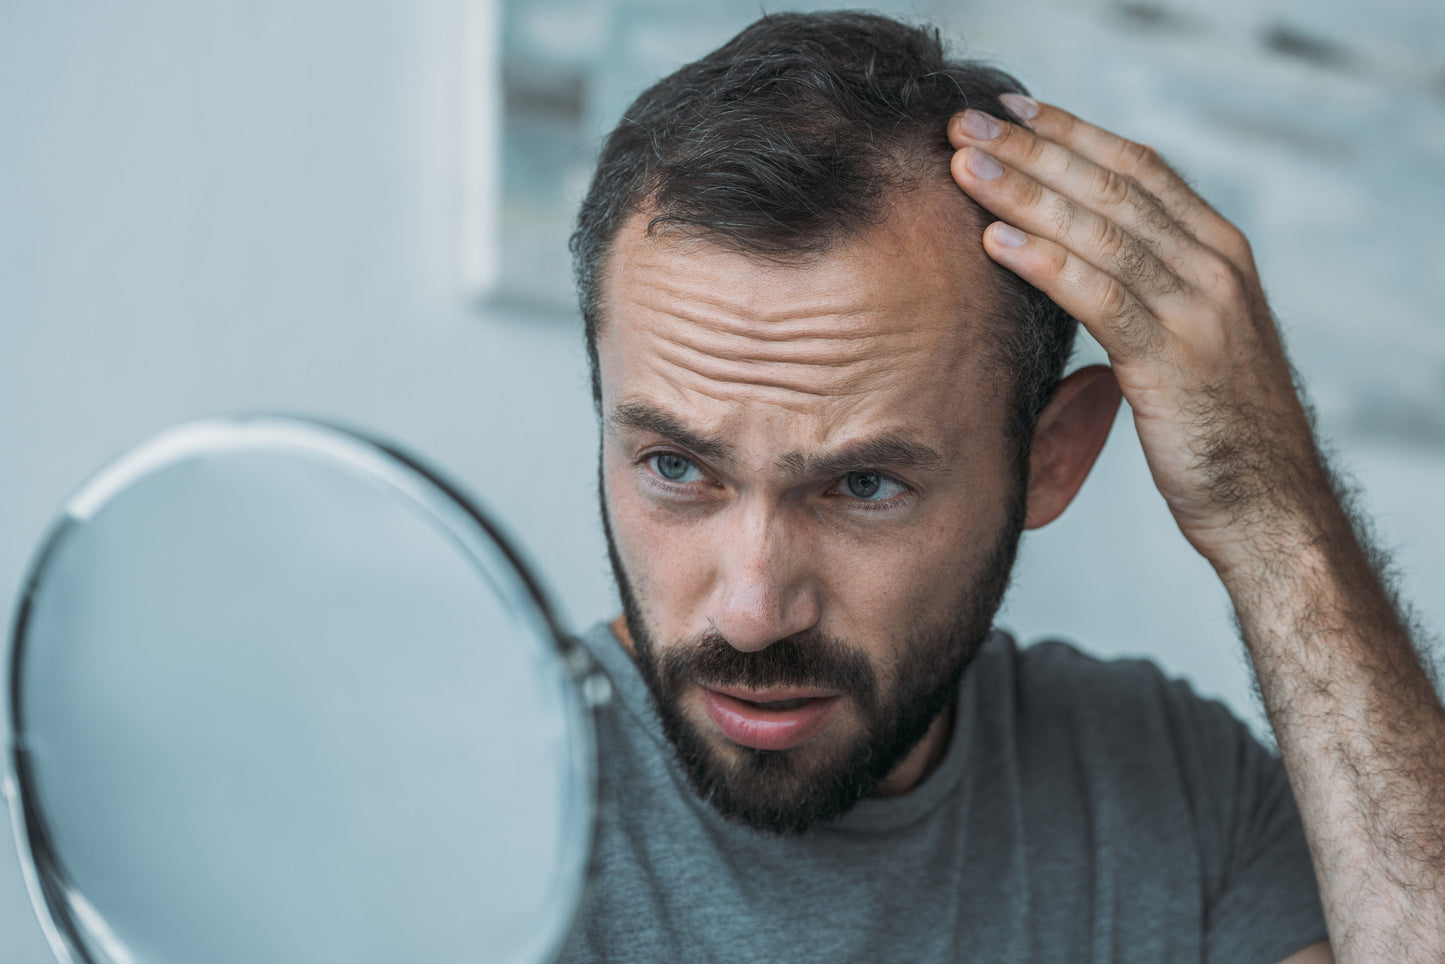 You’re Losing Your Hair: What Should You Do Next?